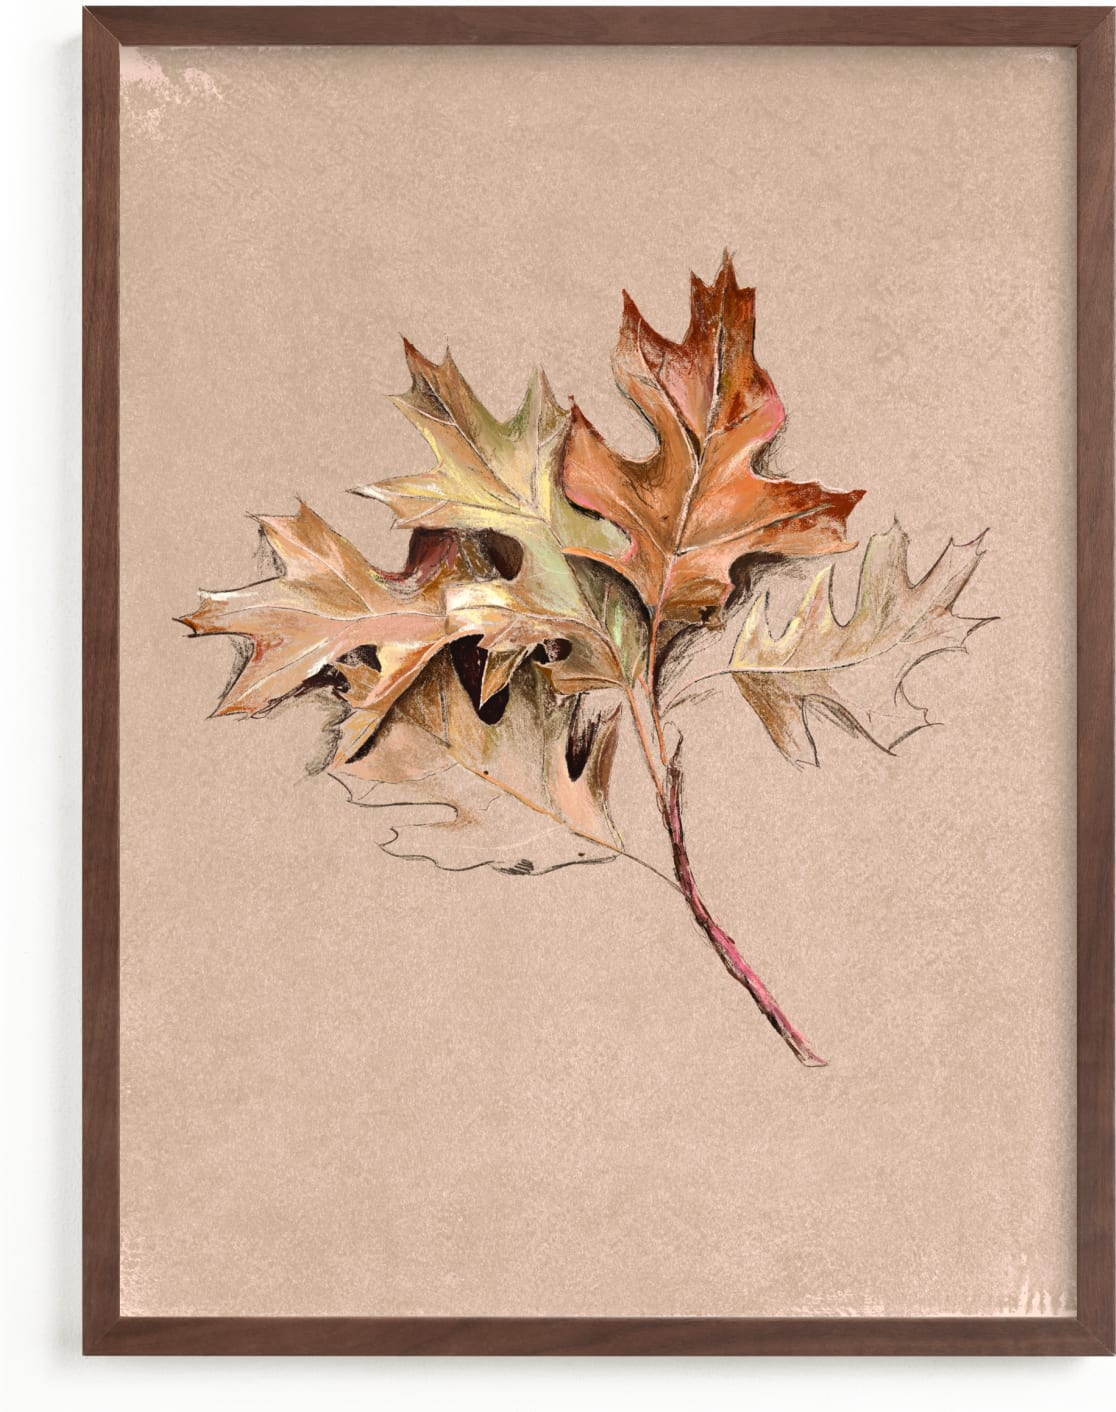 This is a brown art by Olivia Kanaley Inman called Leaf Study.